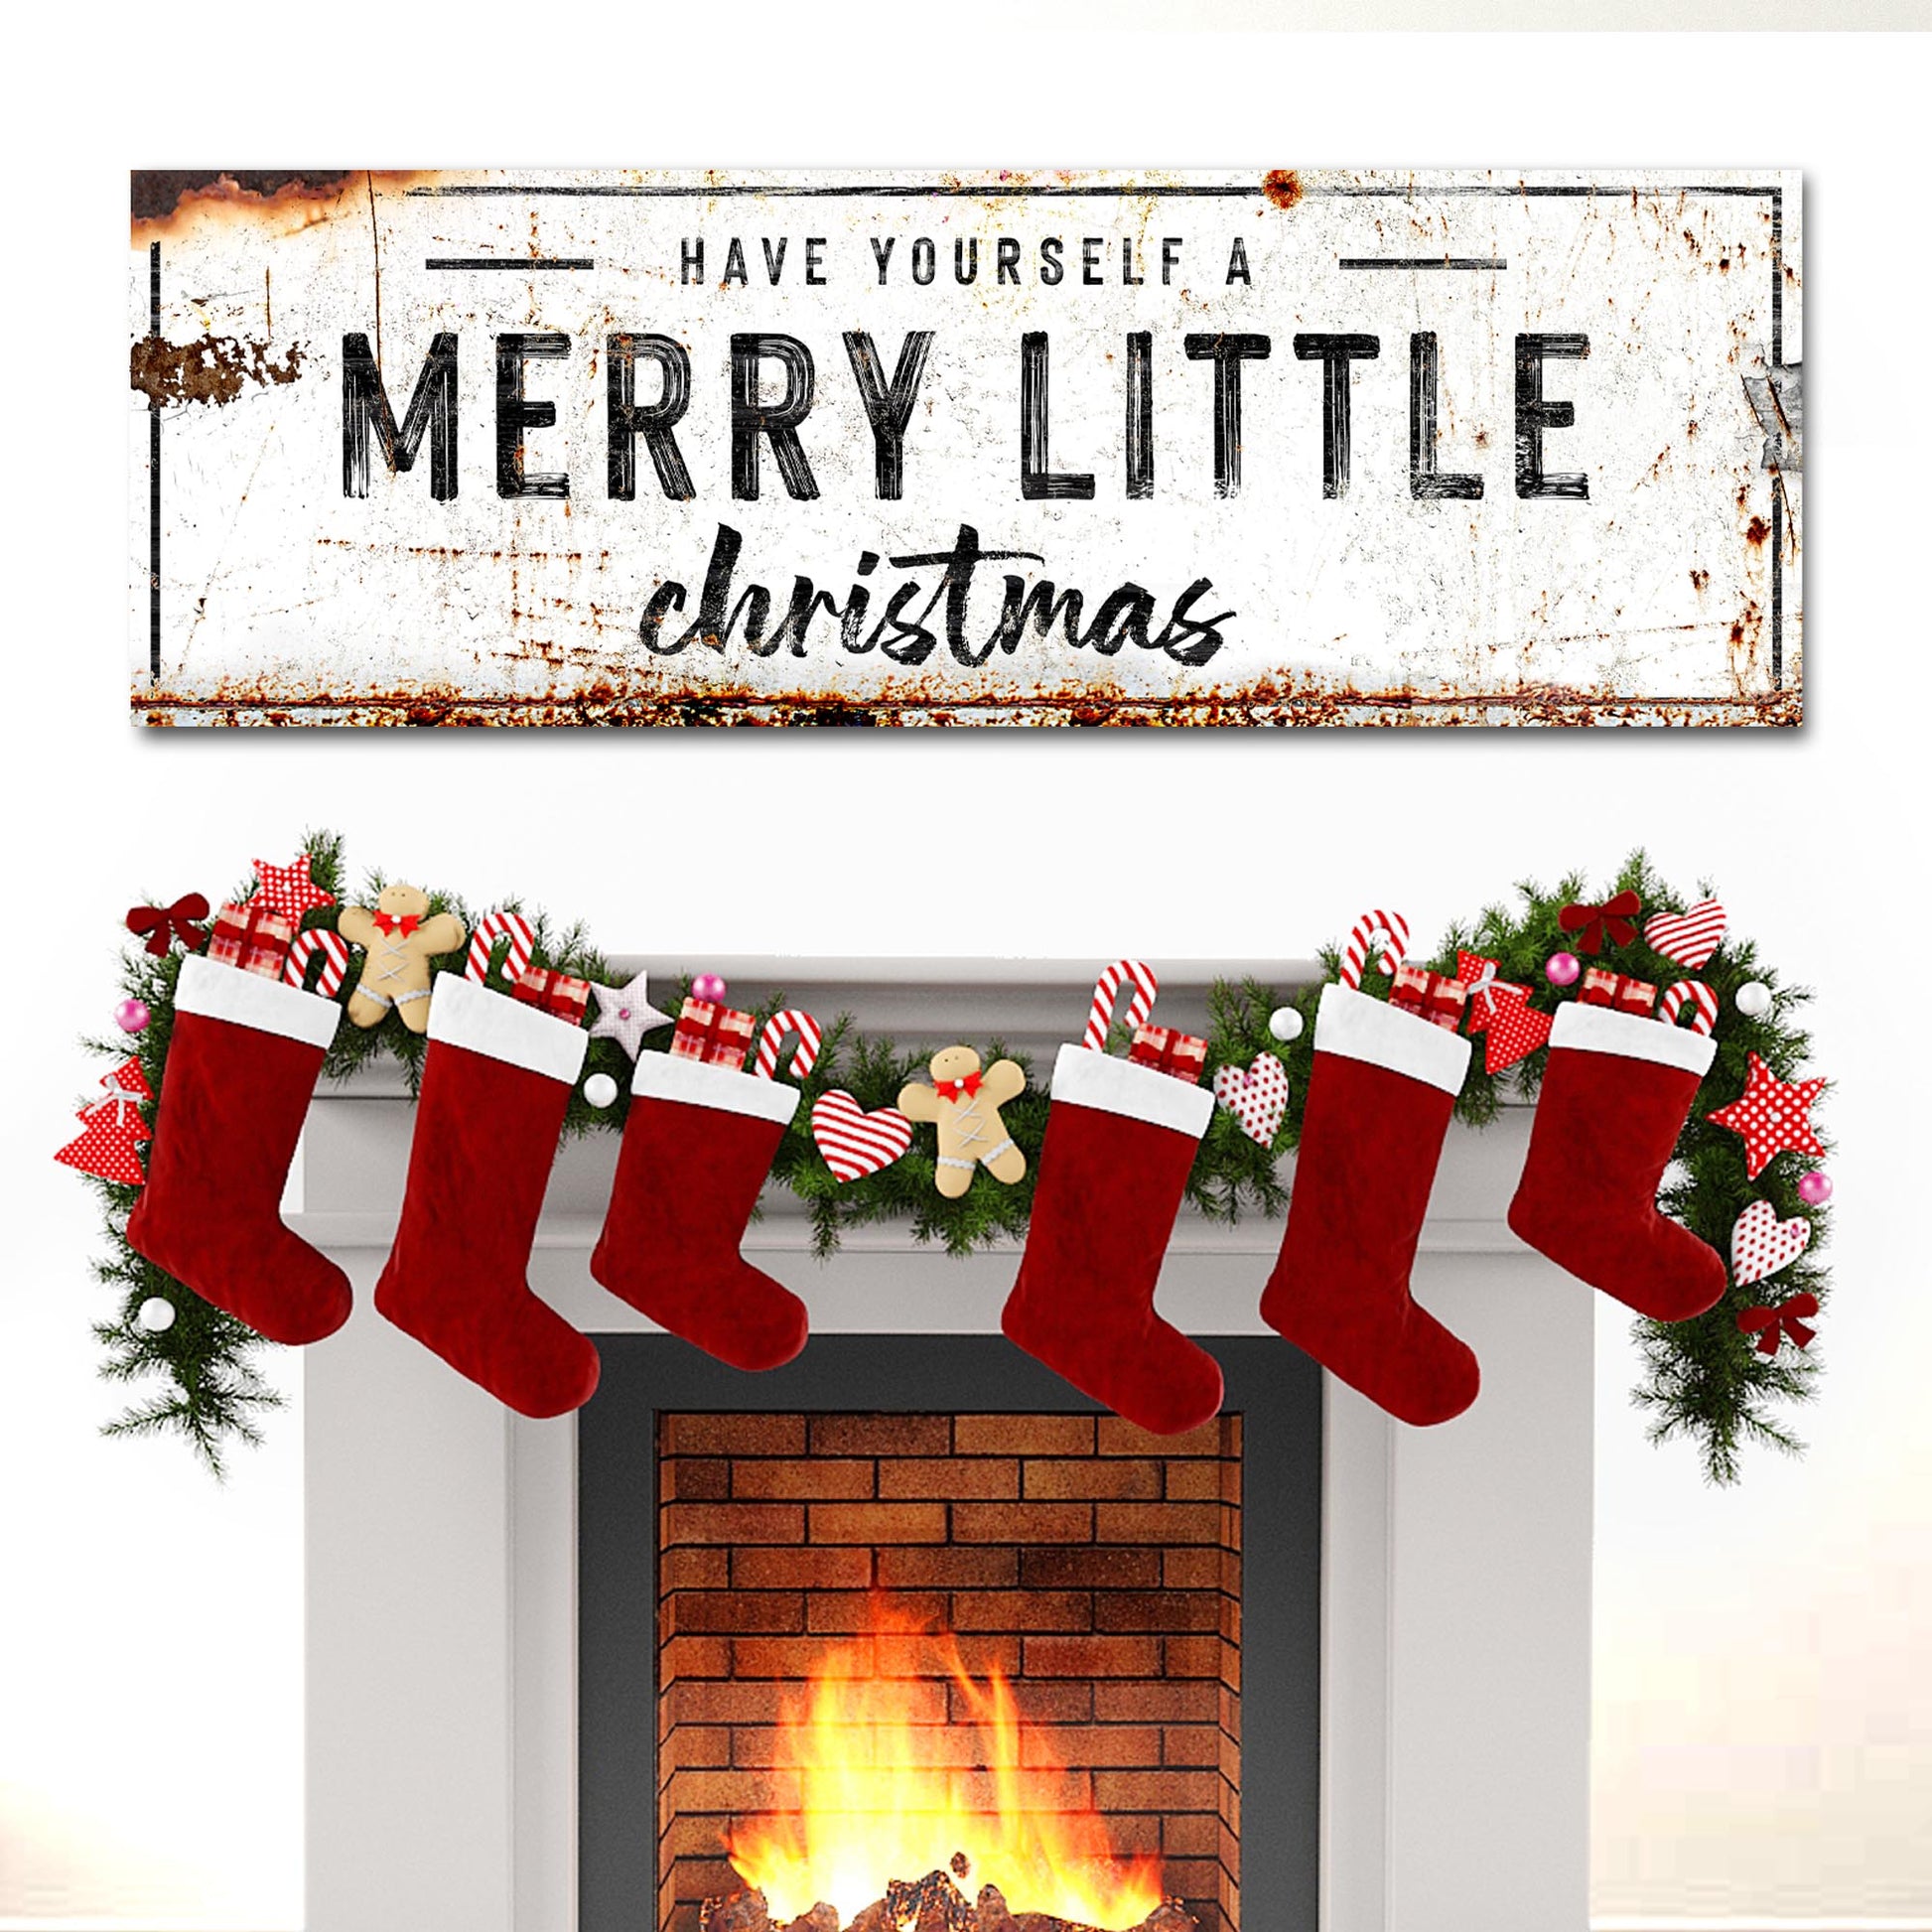 Have Yourself A Merry Little Christmas Sign - Image by Tailored Canvases